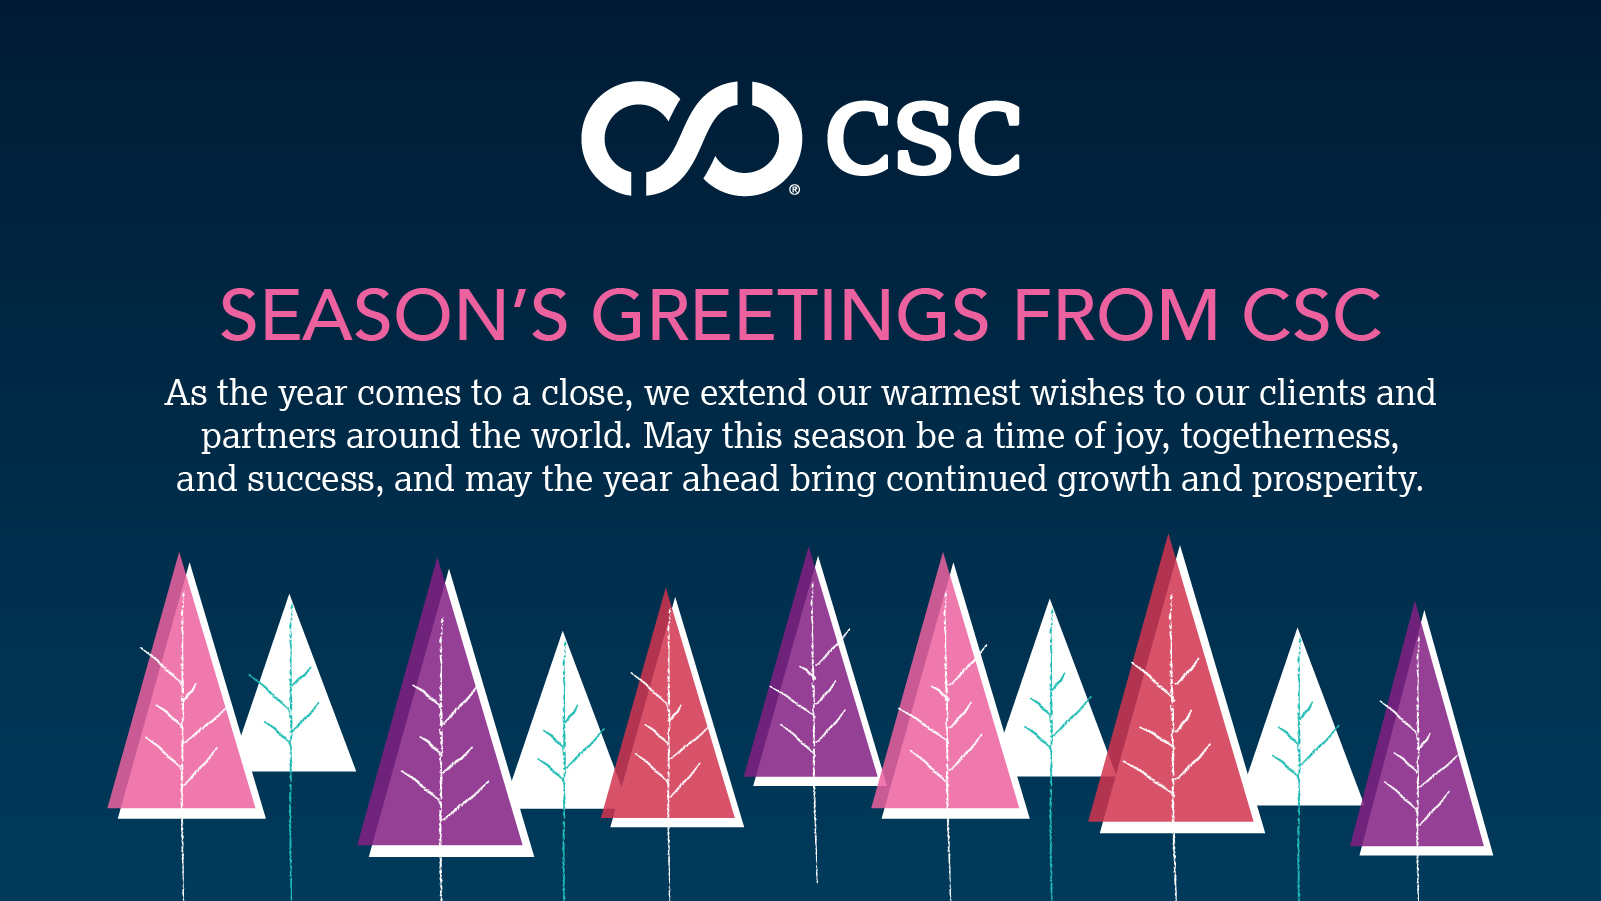 Season’s Greetings from CSC